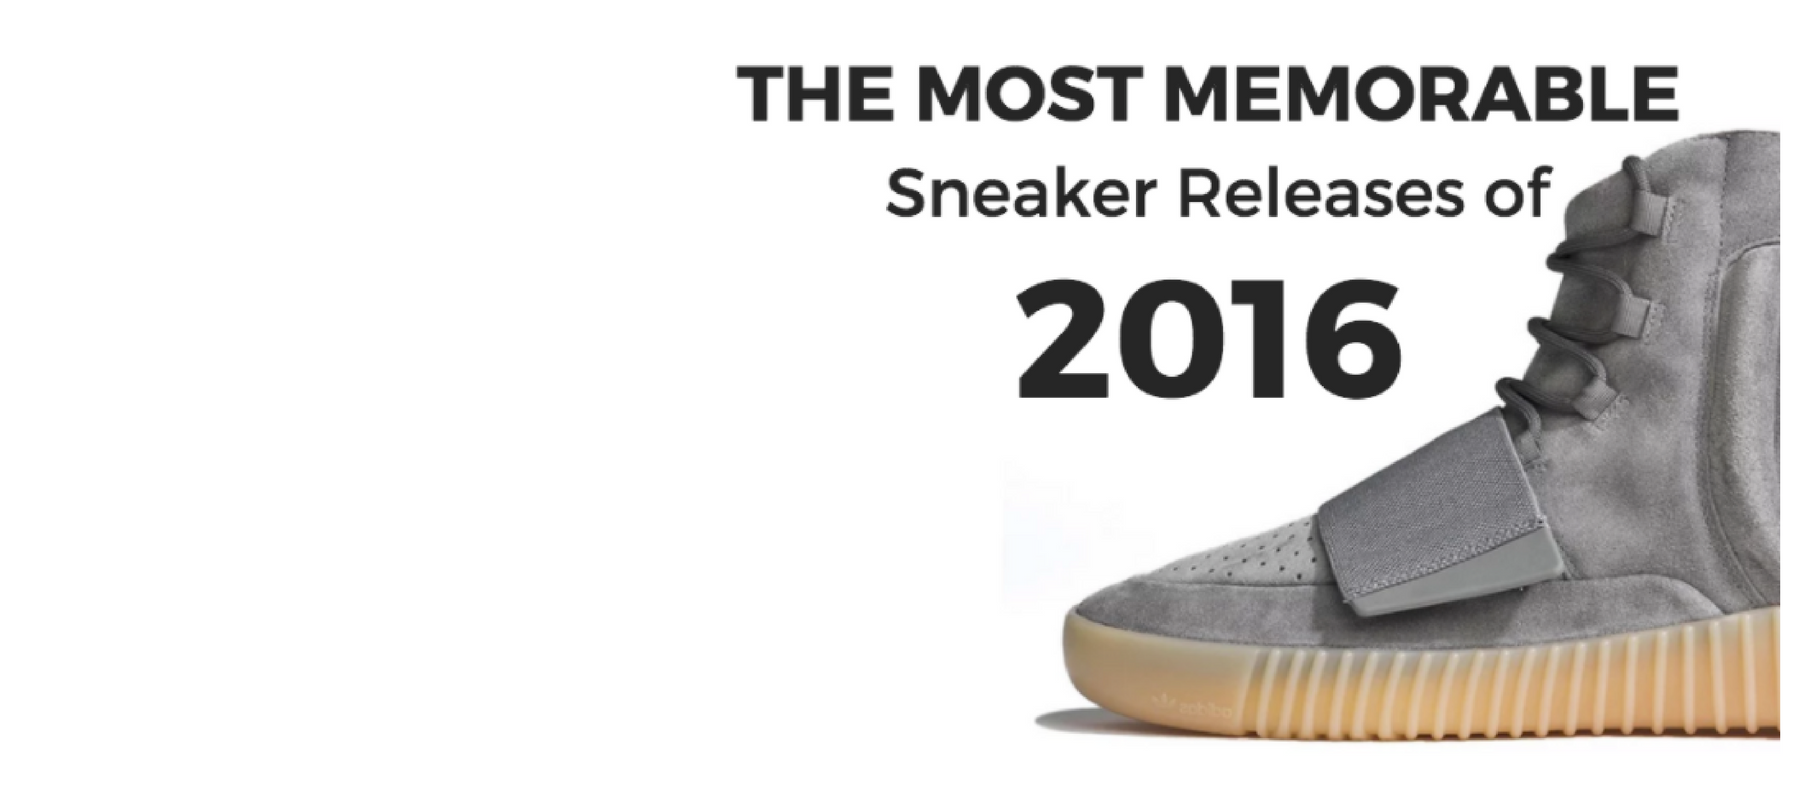 The Most Memorable Sneaker Releases of 2016